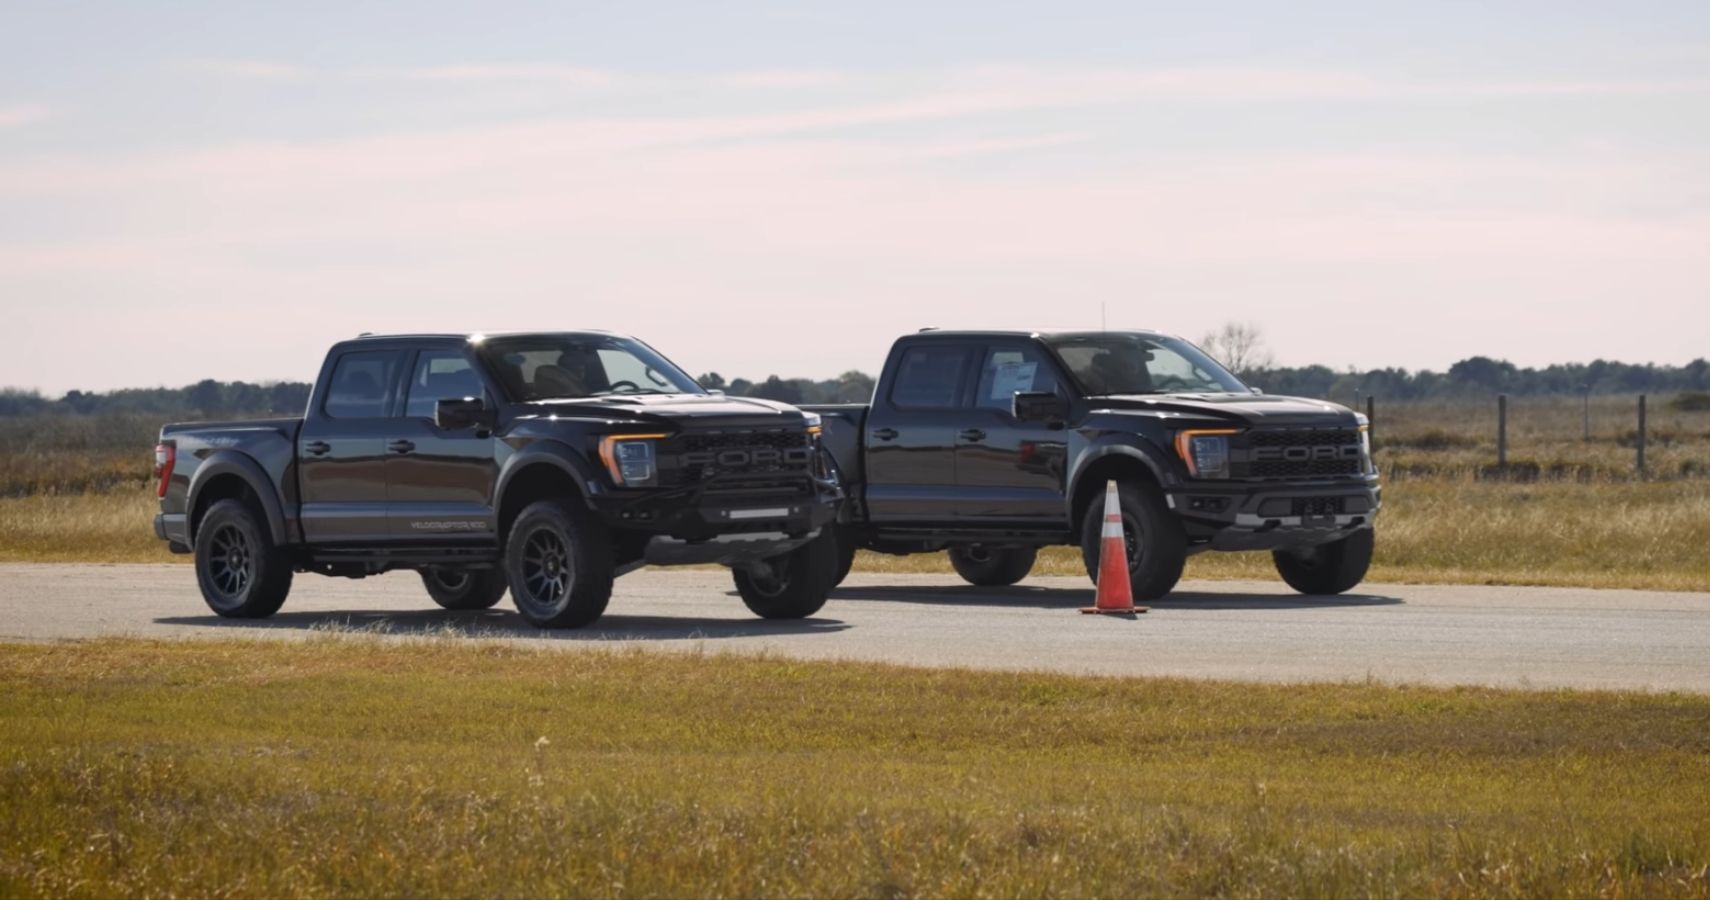 Watch This VelociRaptor Pickup Drag Race The 2022 Ford F-150 Raptor